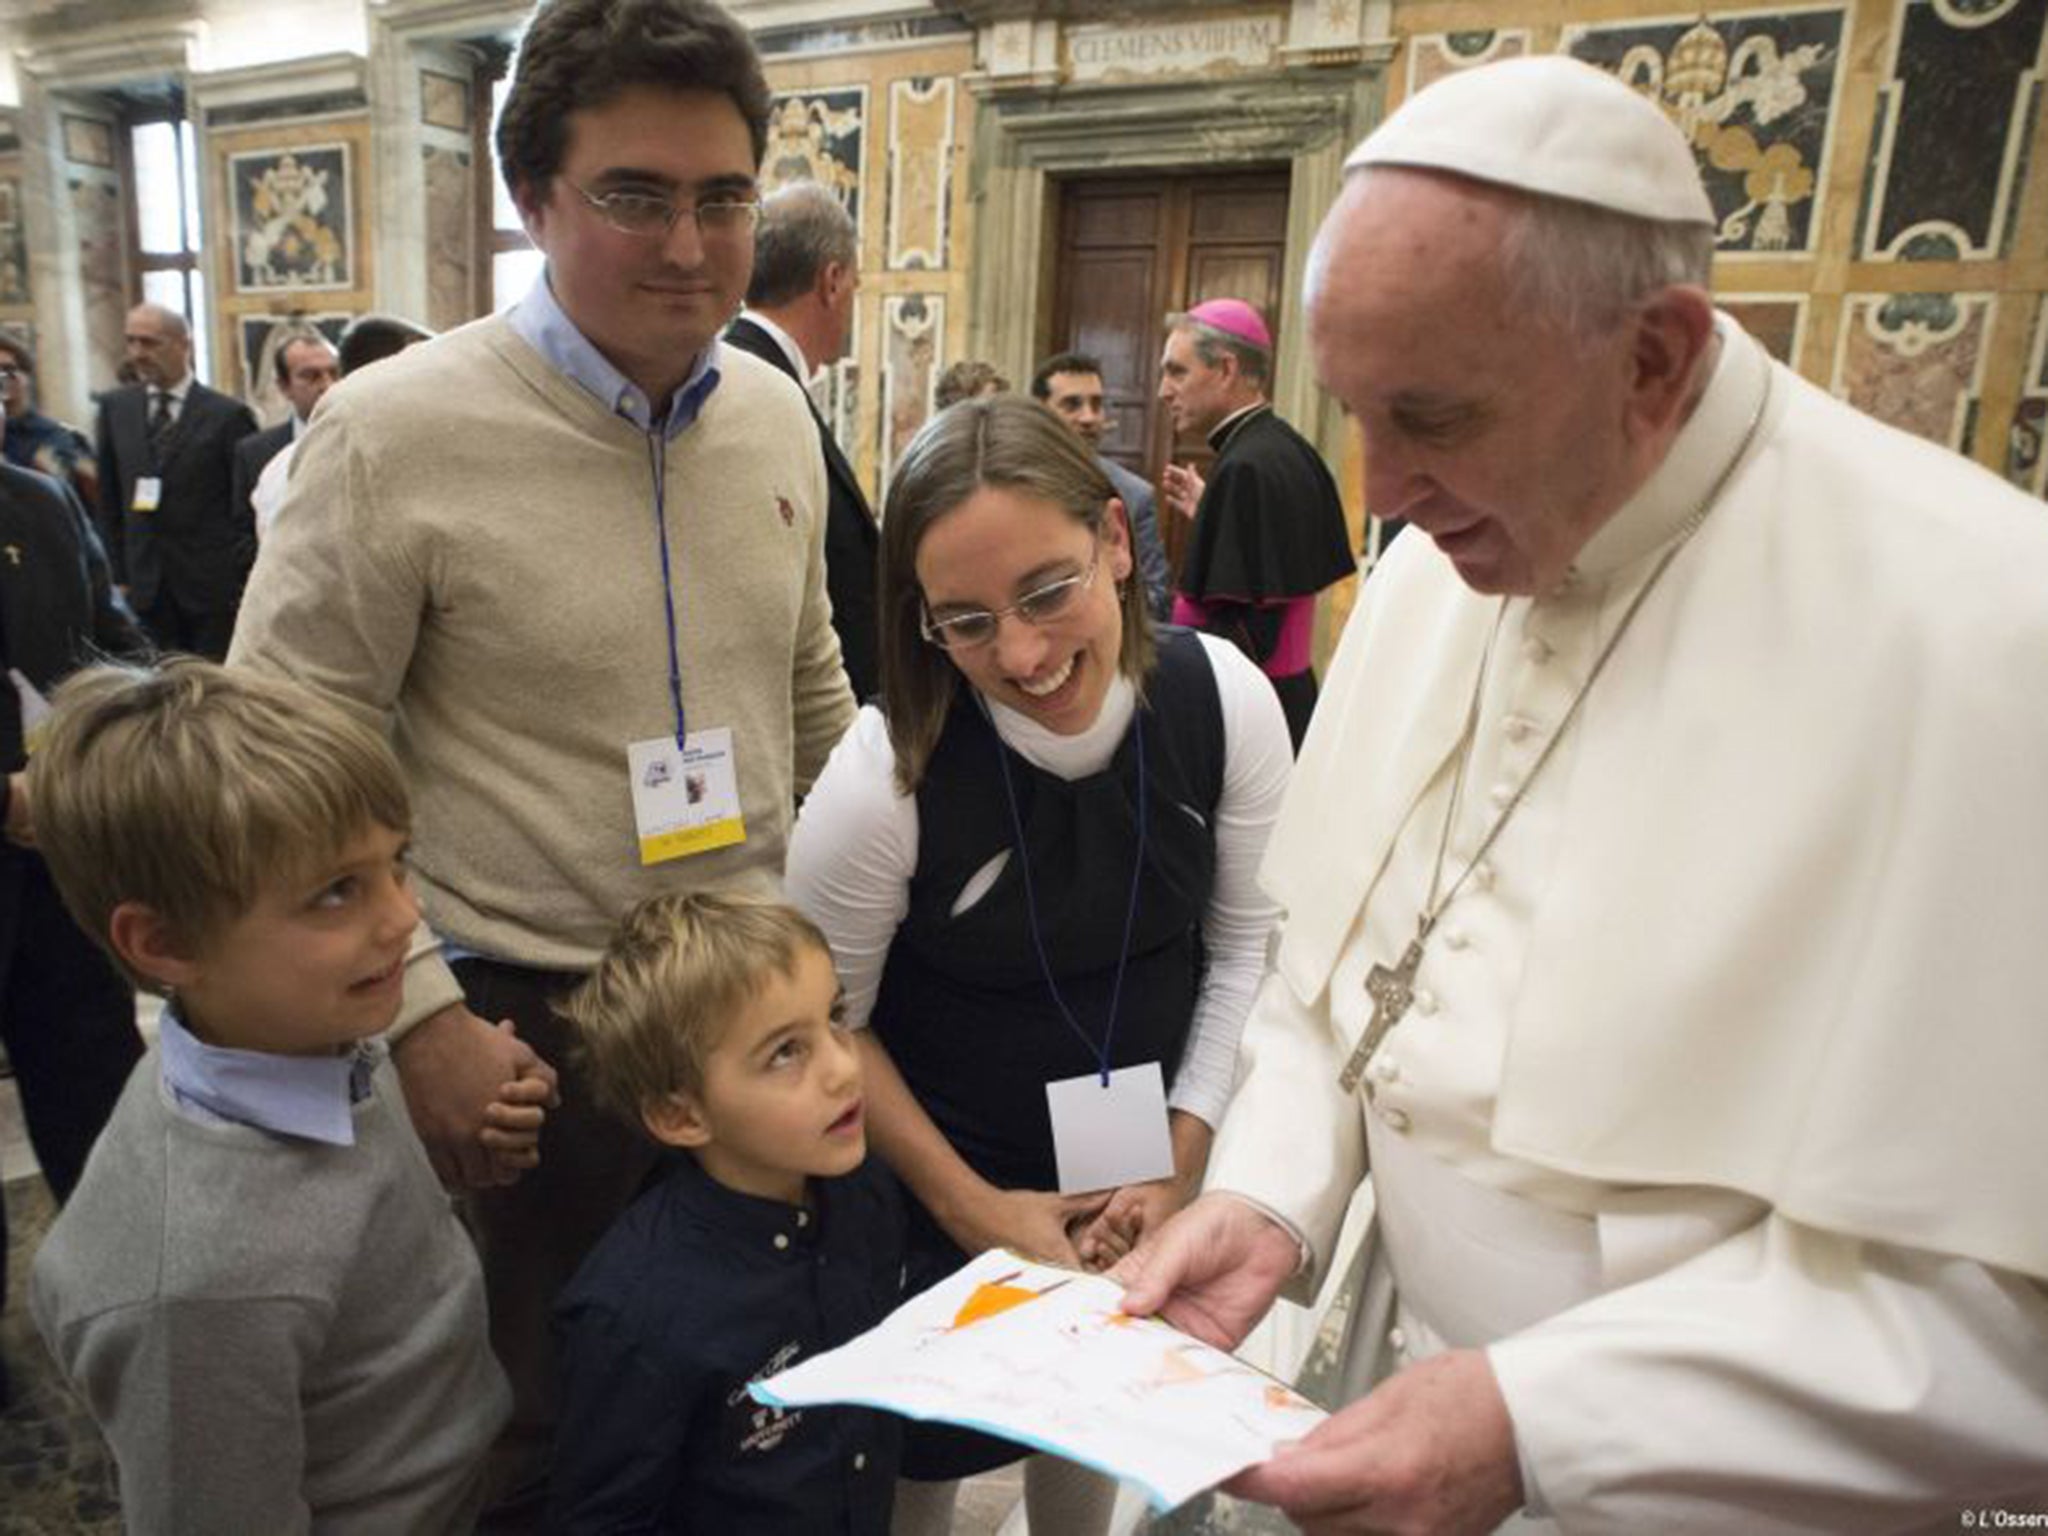 Pope Francis appointed the outside management consultant in 2013